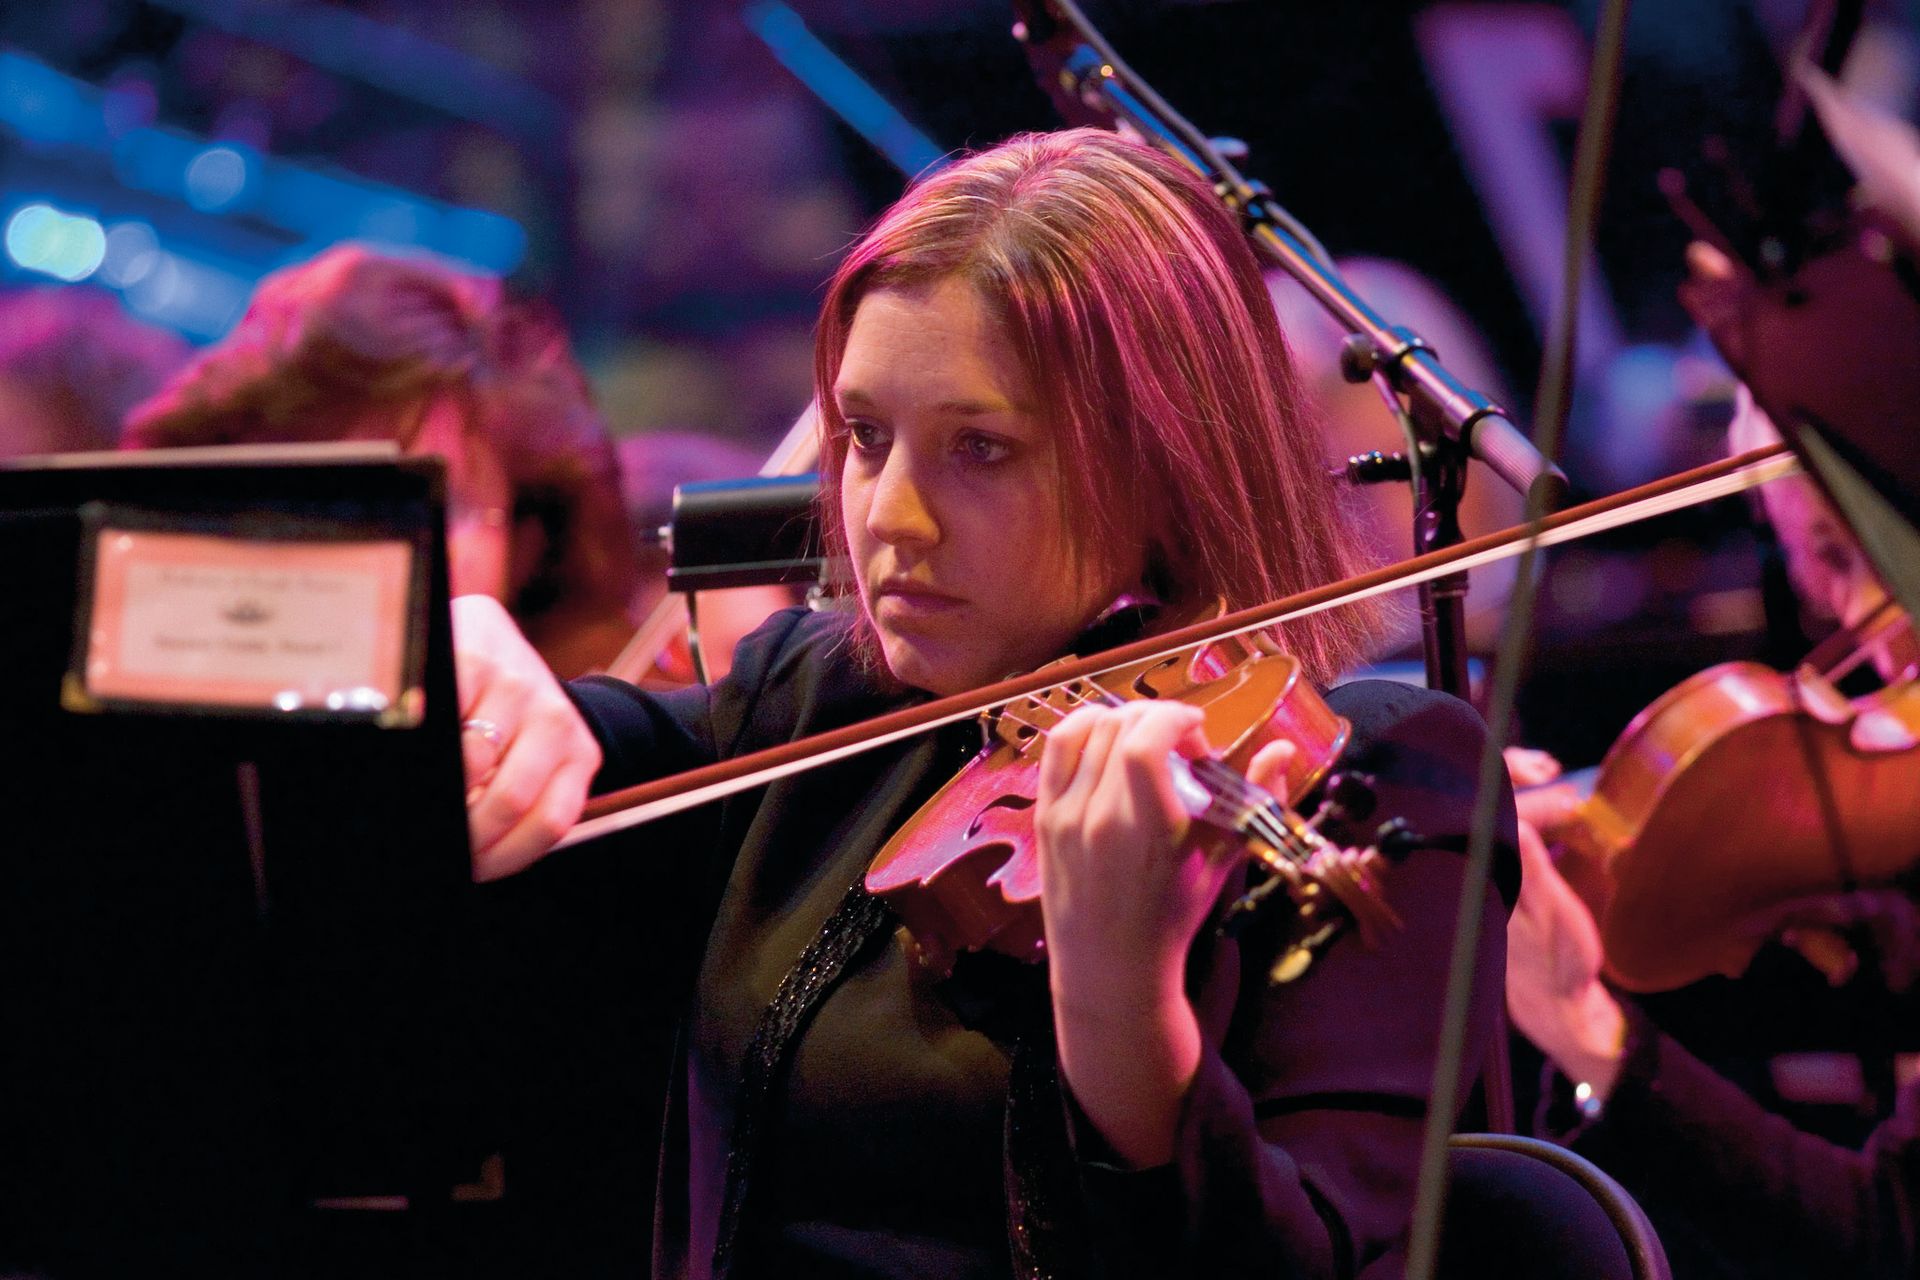 A violinist plays in the Orchestra at Temple Square during a concert.